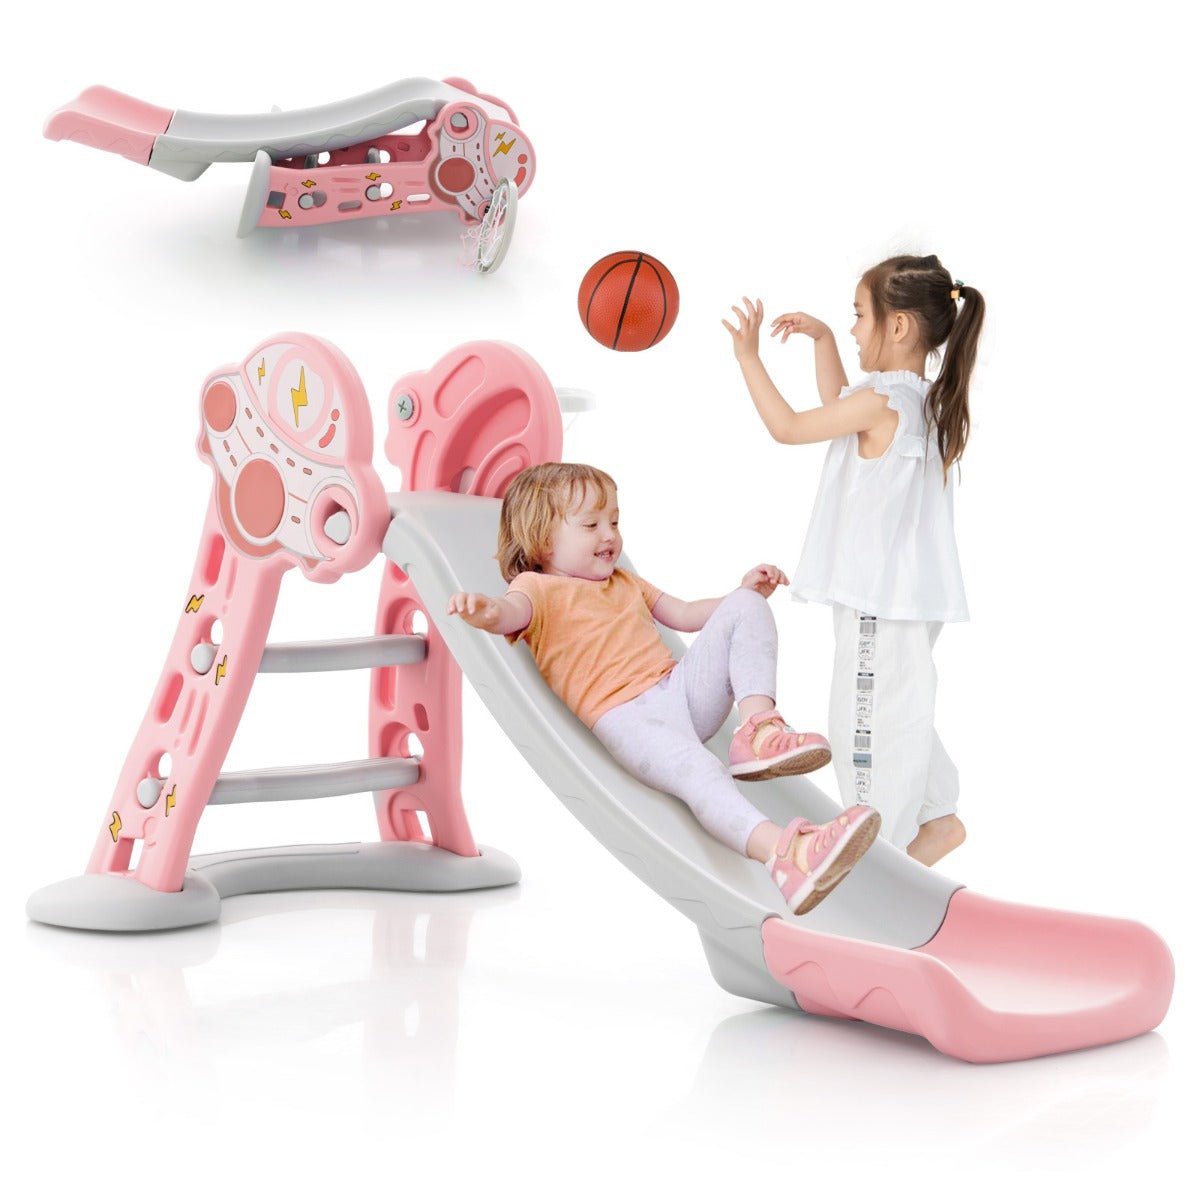 Pink Fun Slide with Basketball Action